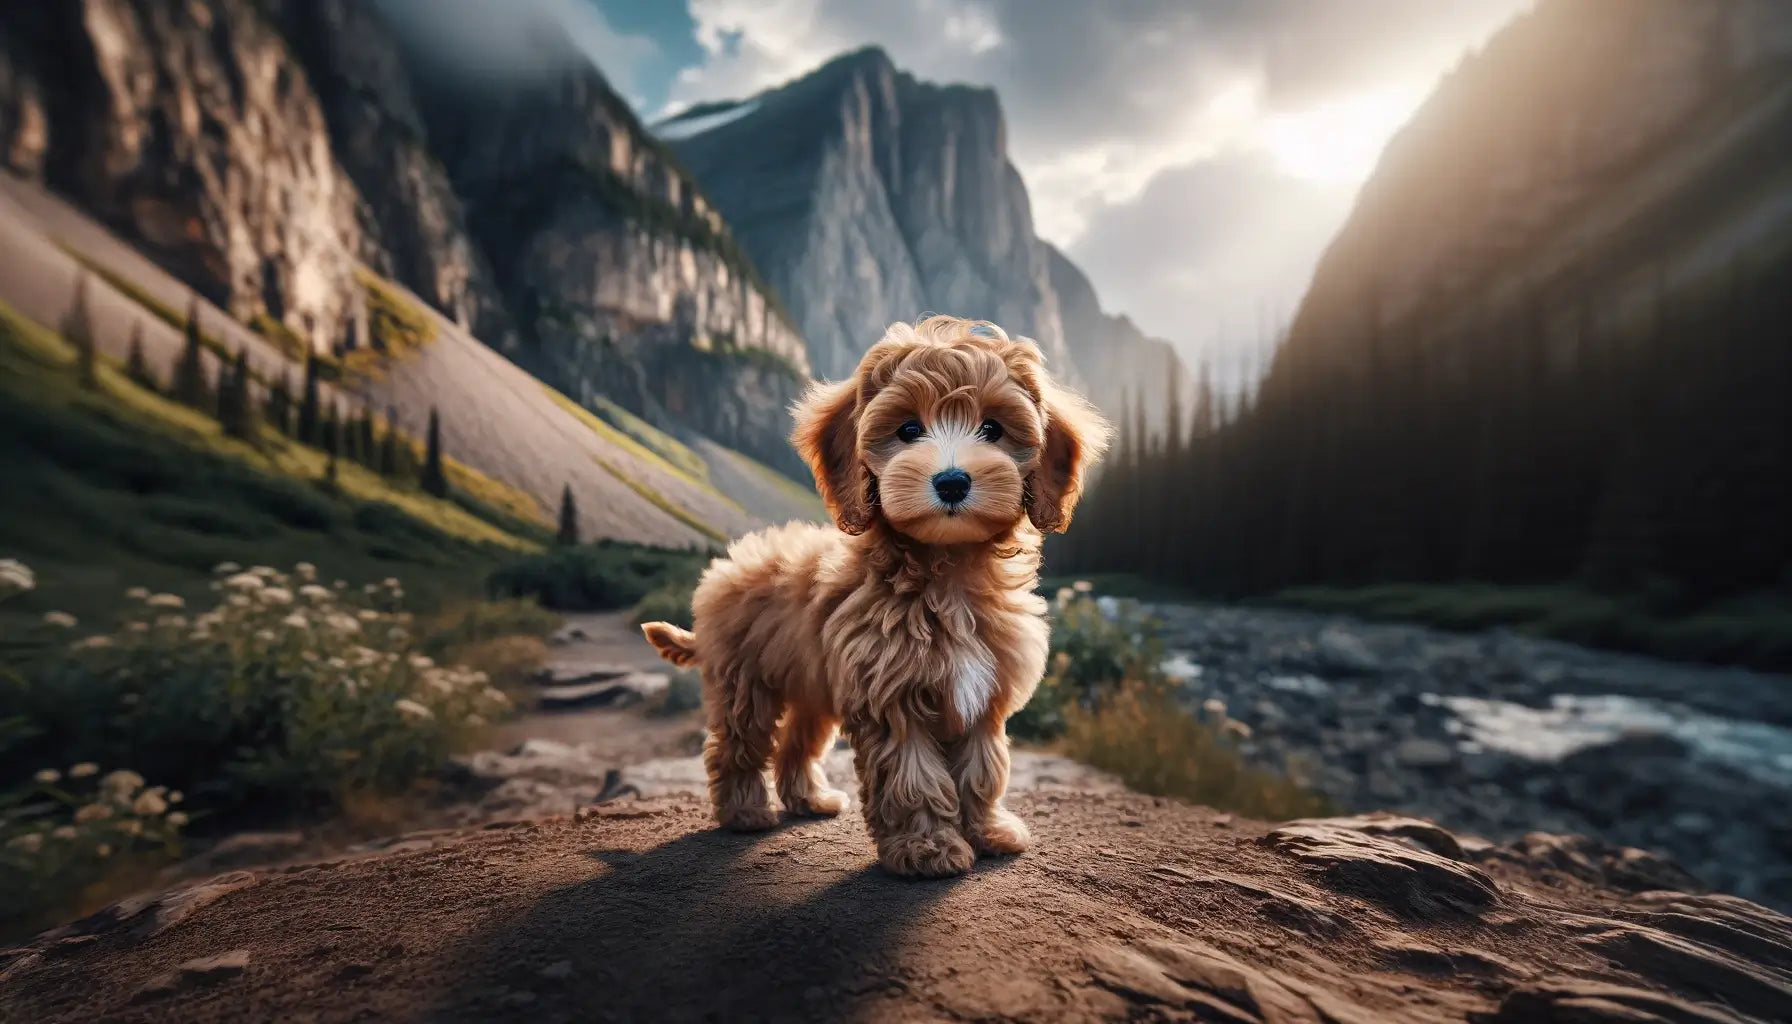 Teacup Goldendoodle's tiny stature is showcased against a backdrop that accentuates its unique appearance and strong miniature physique.